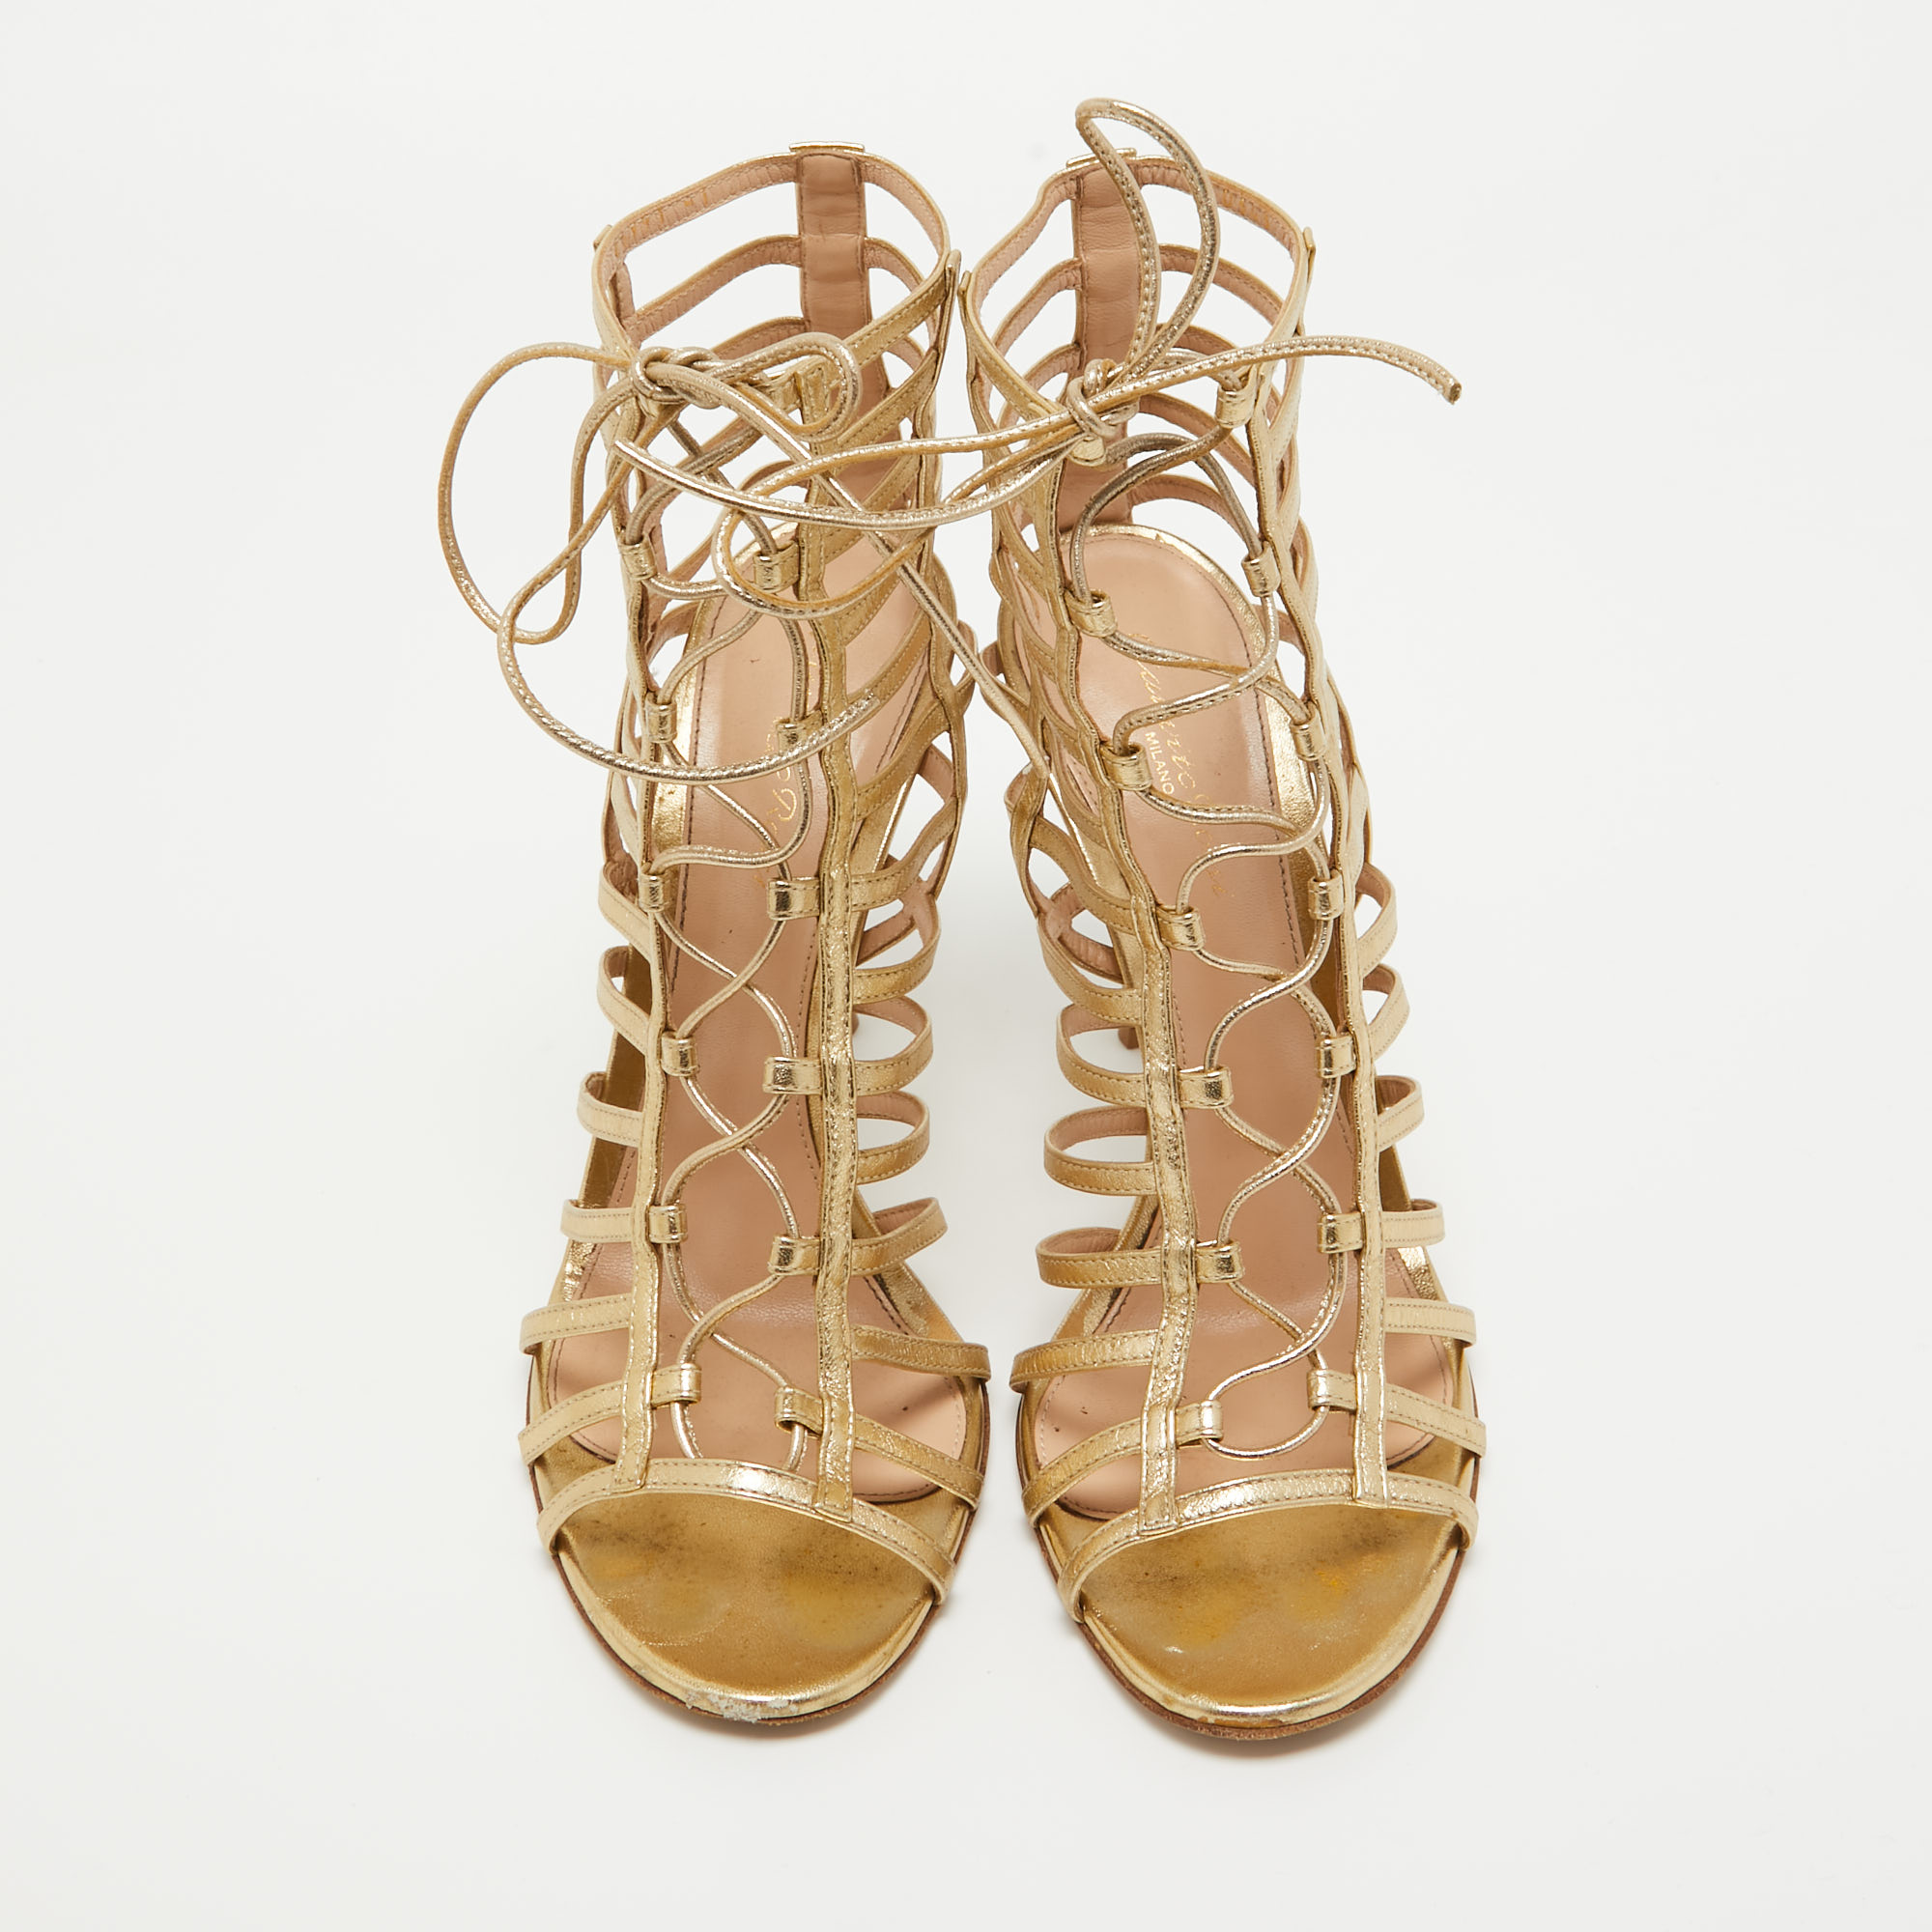 Gianvito Rossi Gold Leather Strappy Lace Up Sandals Size 41